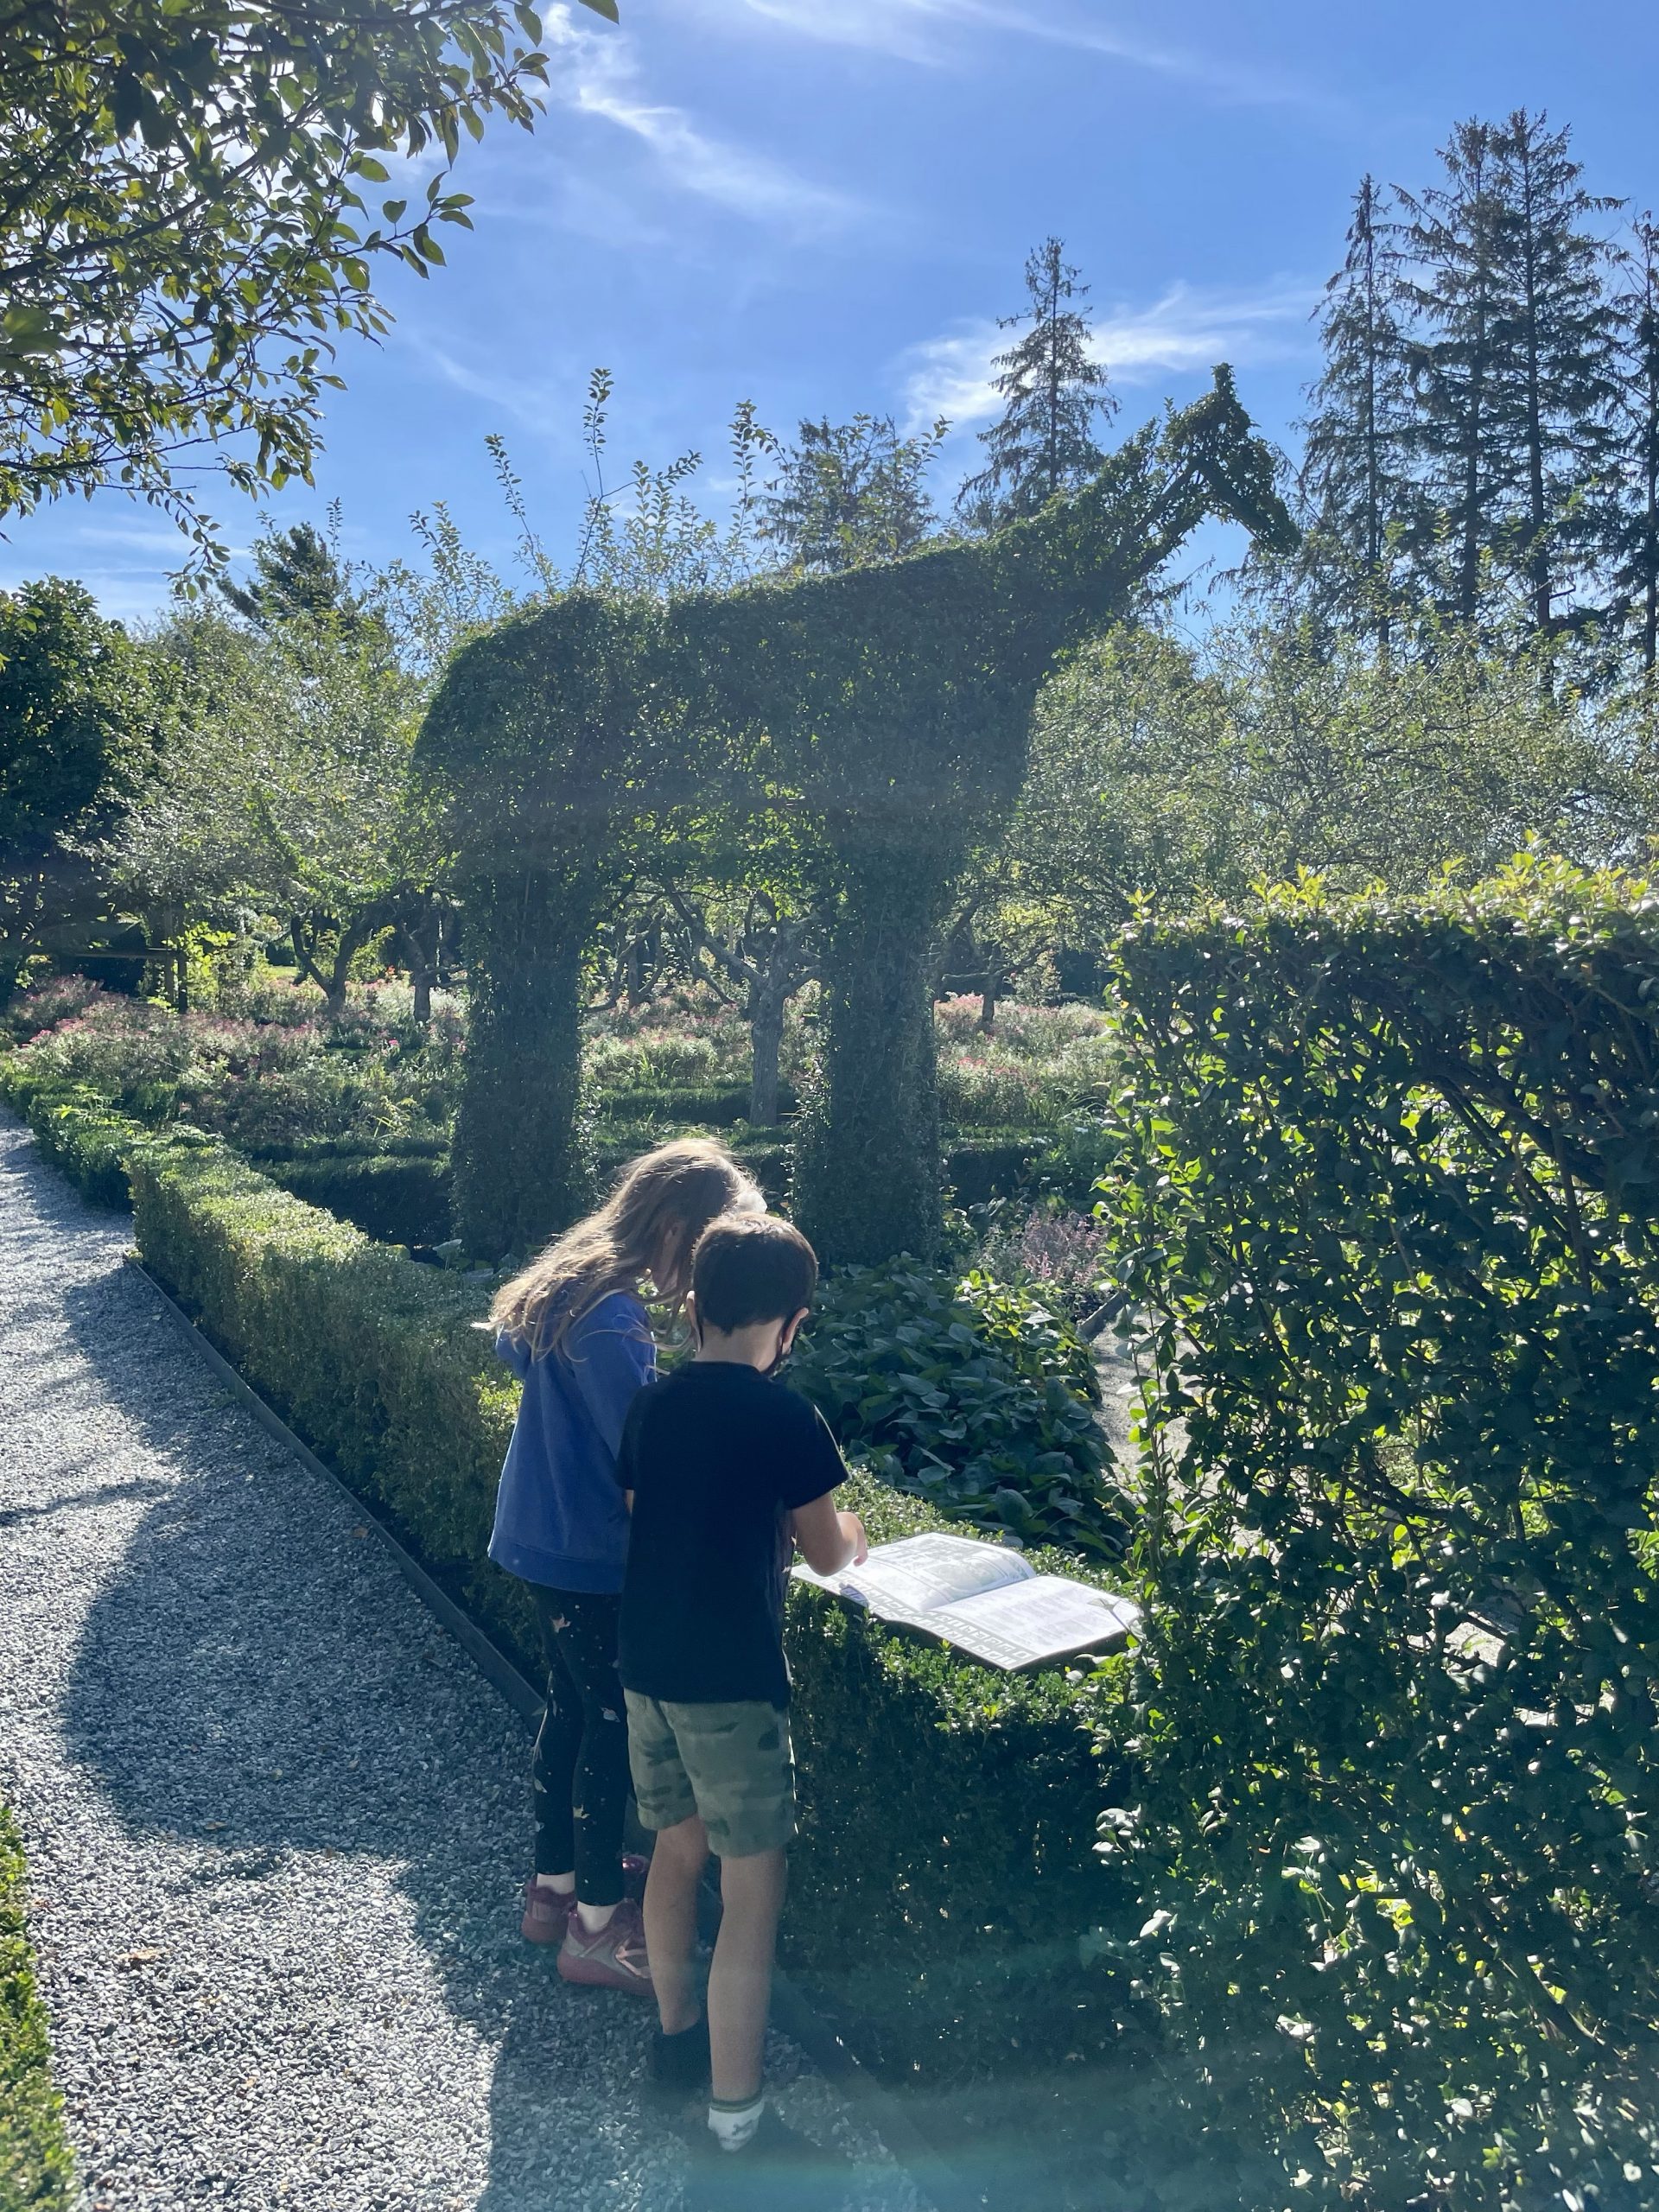 The Green Animals Topiary Gardens in Portsmouth, Rhode Island with kids